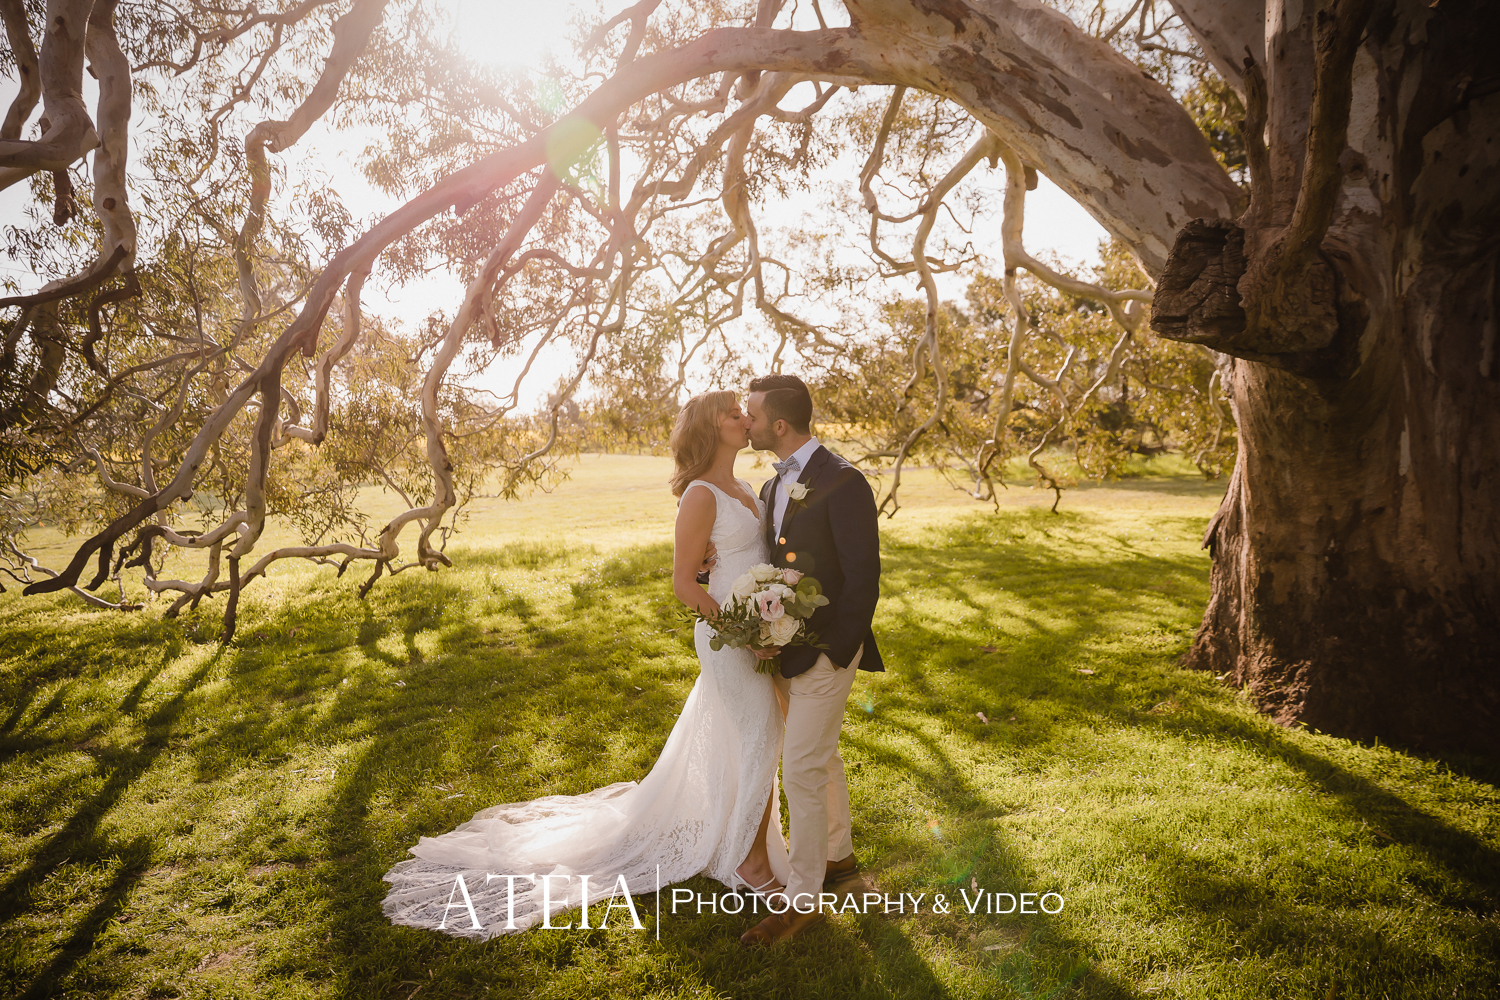 , Amanda and Daniel&#8217;s wedding photography at Rocklea Farm Stonehaven captured by ATEIA Photography &#038; Video